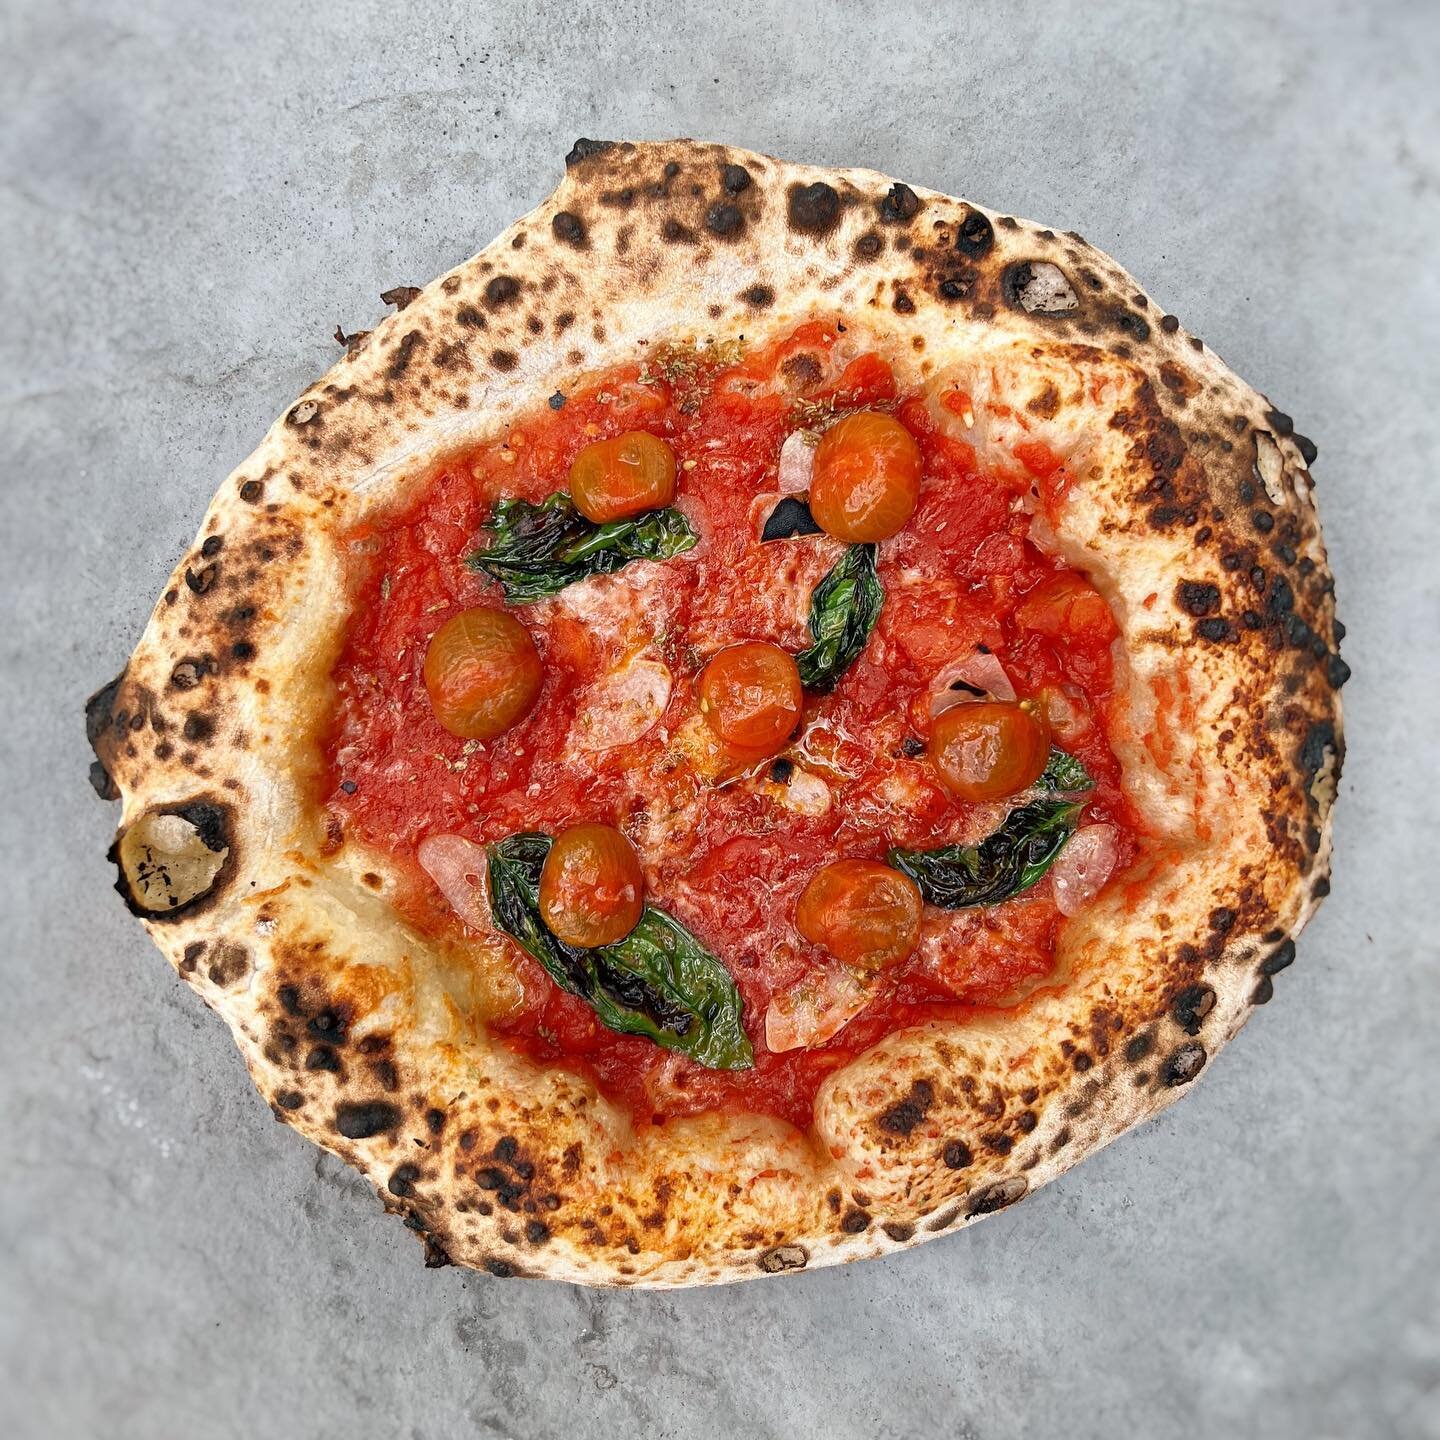 We&rsquo;re back at @eatjoyland during the Tomato Arts Fest this year! Chef @hseanbrock and I will be making Pizza Marinara with Kombu cured tomatoes. It&rsquo;s seriously a delicious pizza! 8/13 11am - 2pm. Hope to see you there!